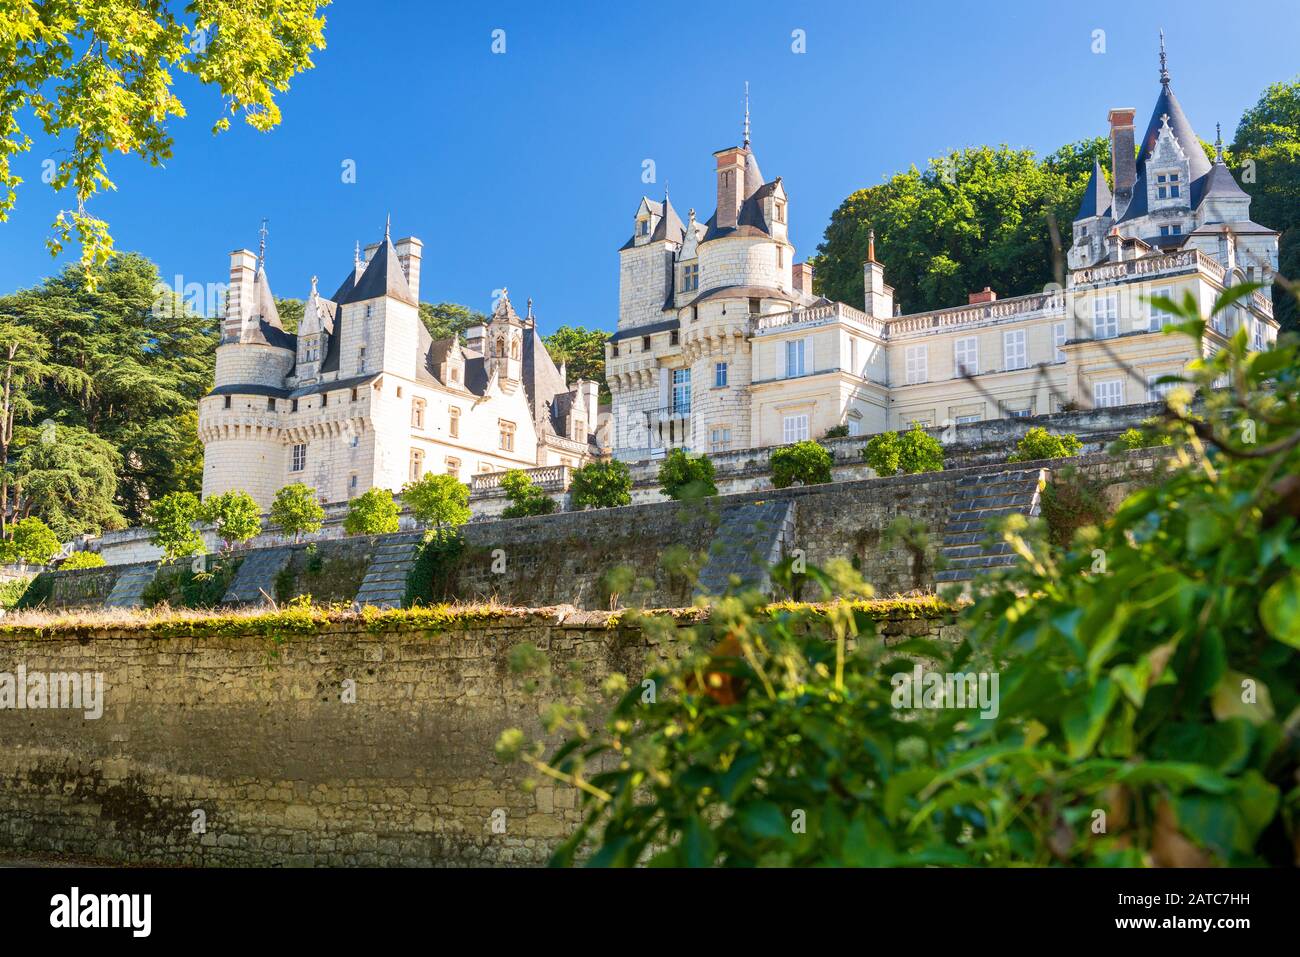 The chateau d'Usse, France. This castle is located in the Loire Valley and was built in the 15th century. Stock Photo